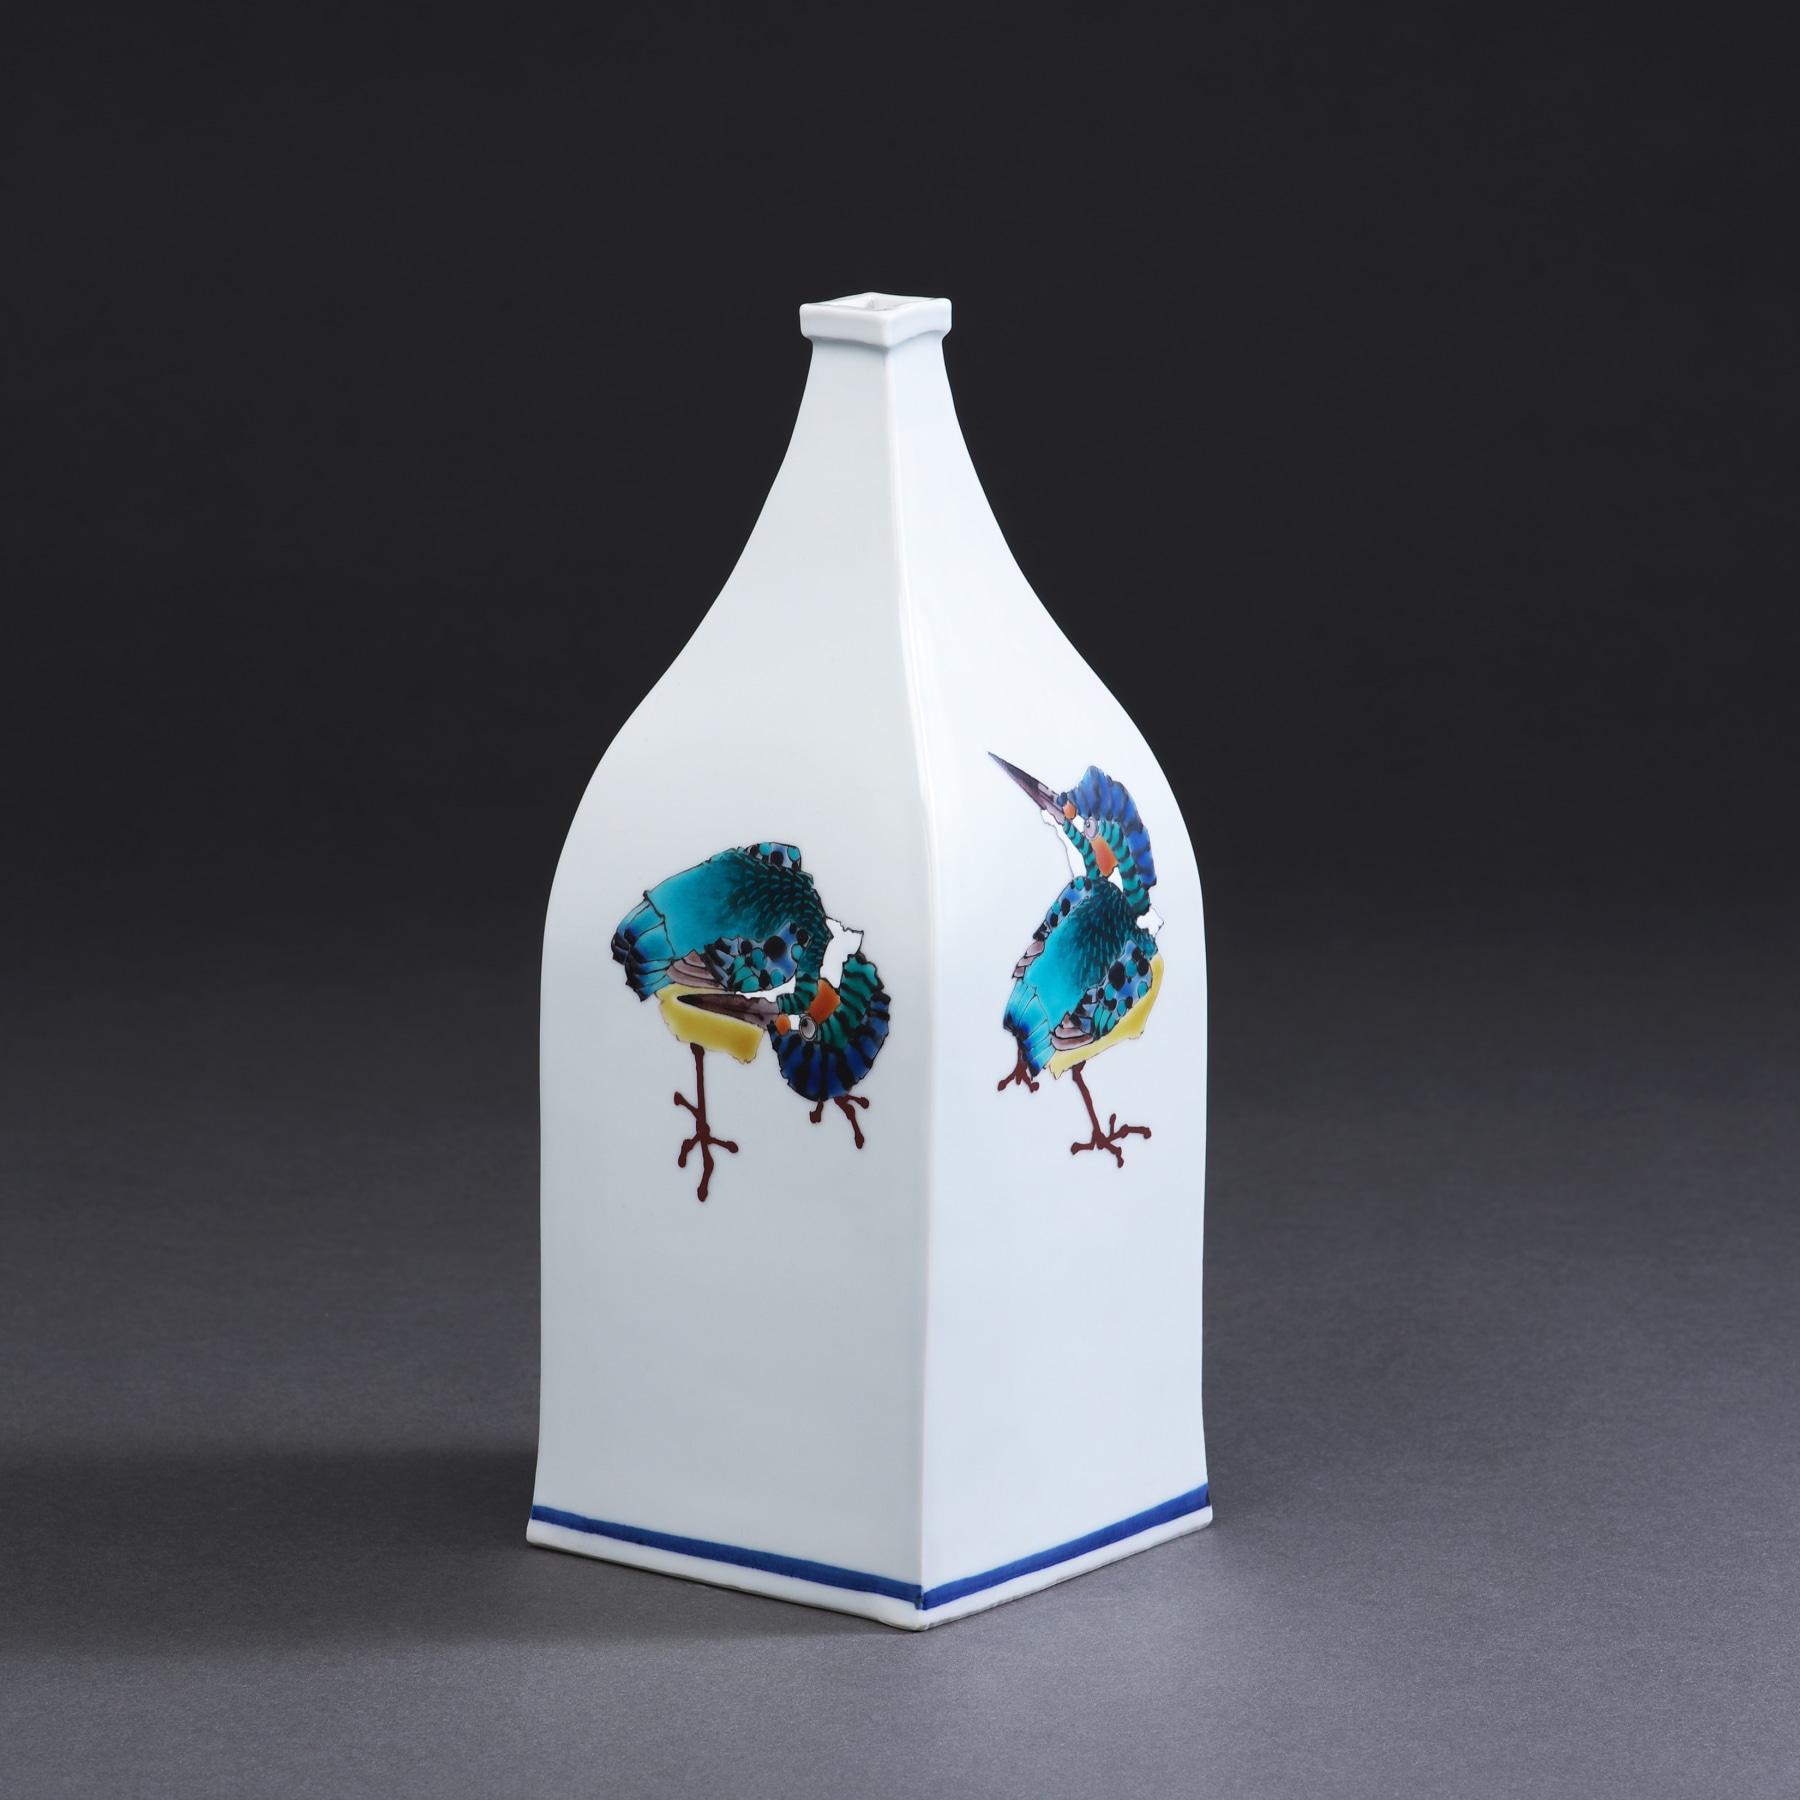 Square bottle with raised mouth decorated with caricature of kingfishers, 2017